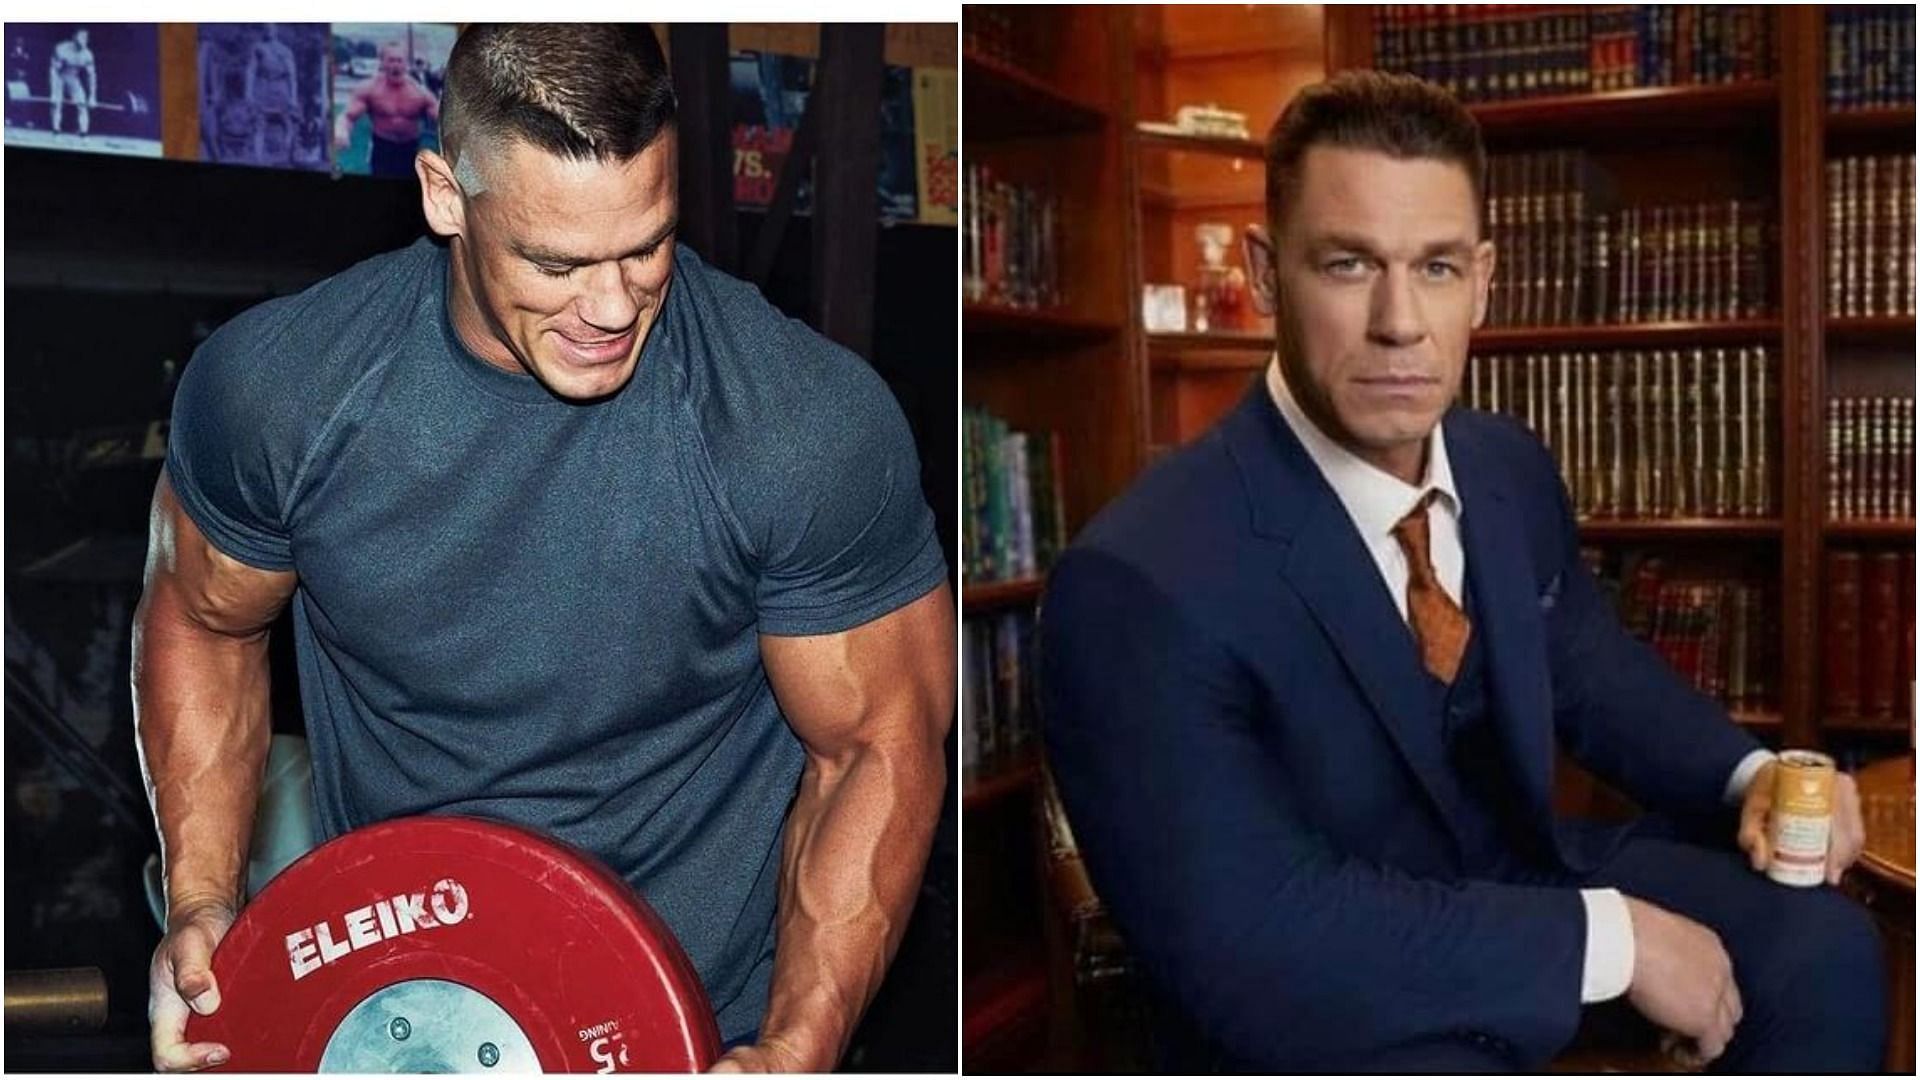 John Cena&rsquo;s workout routine plan will assist you in increasing muscular growth and volume (Image via Instagram)